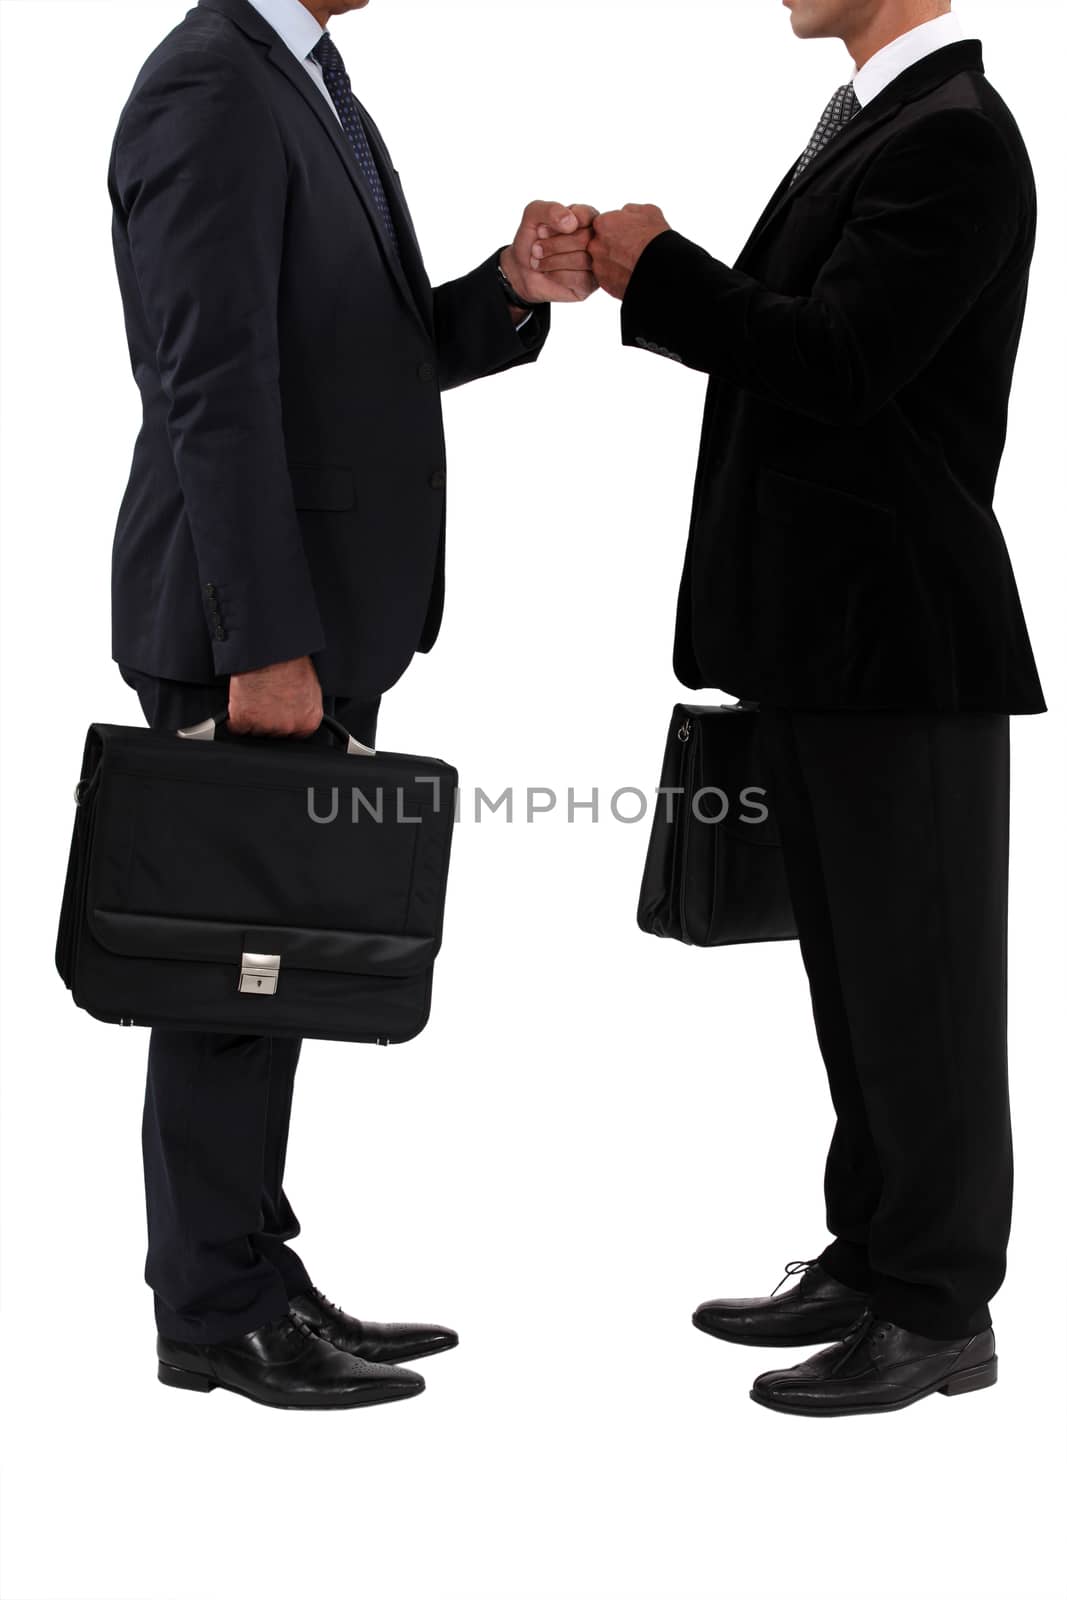 Two businessmen bumping fists by phovoir